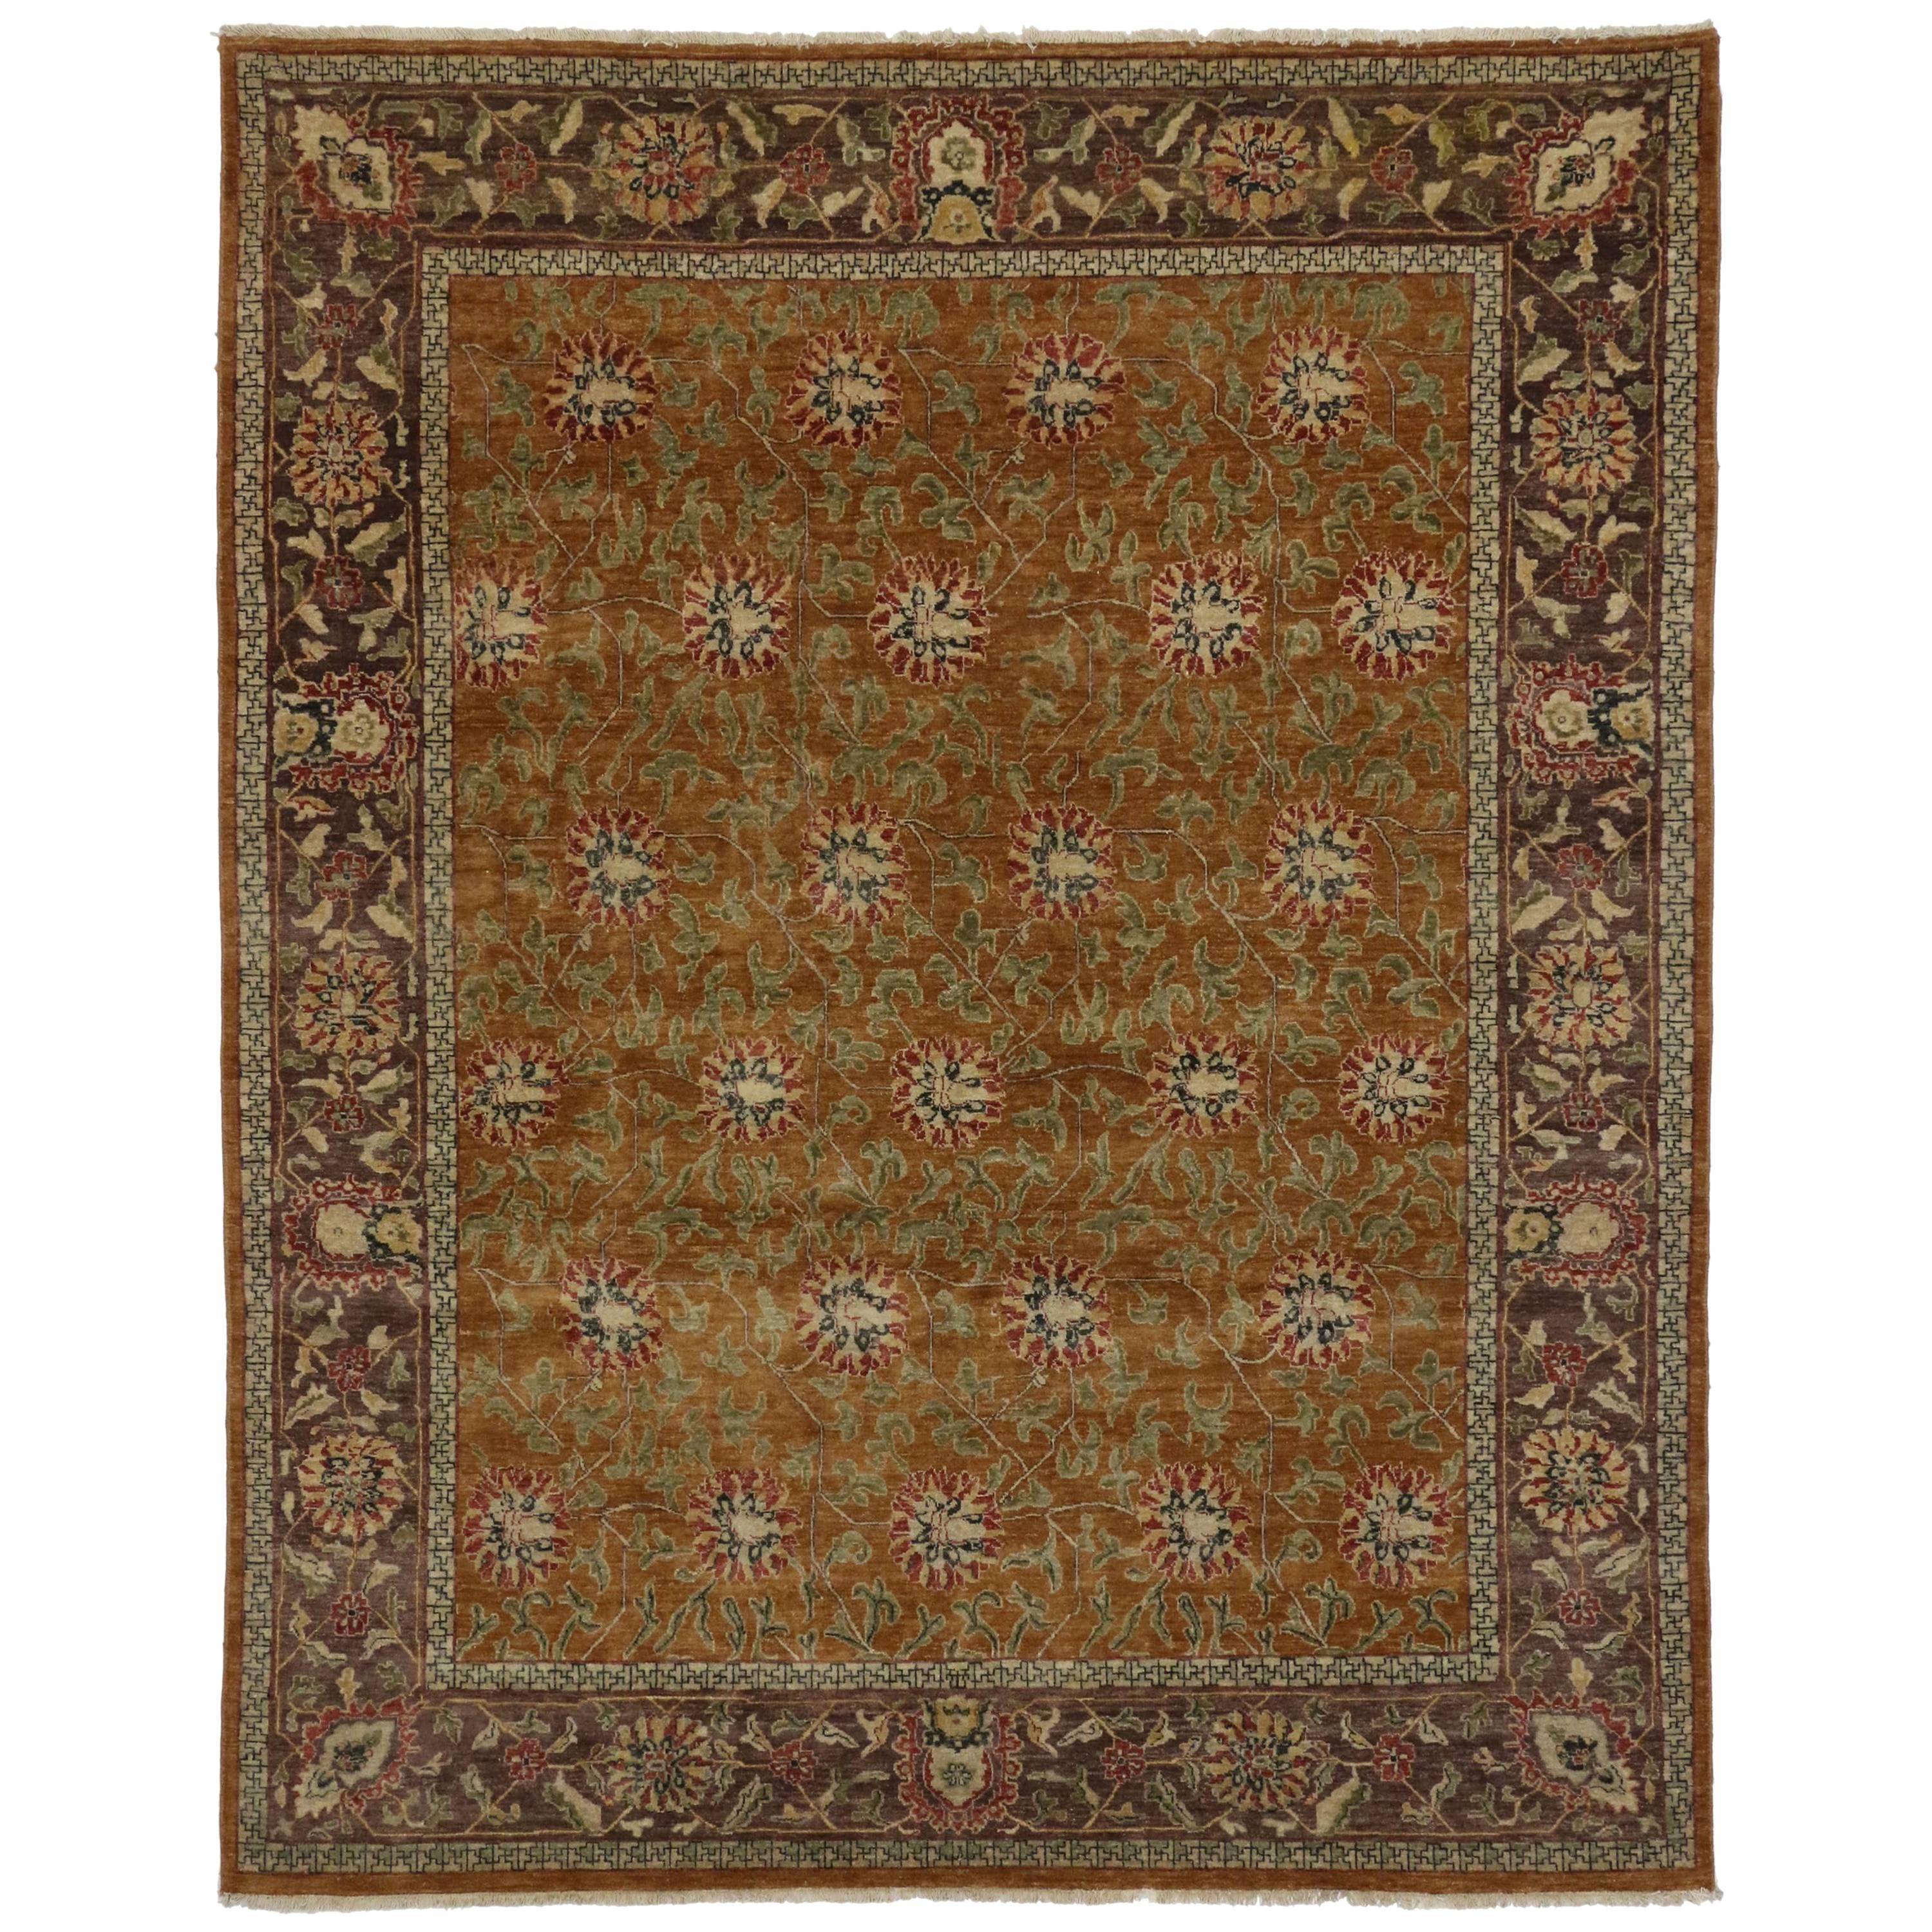 New Contemporary Indian Area Rug with Rustic Arts and Crafts Style